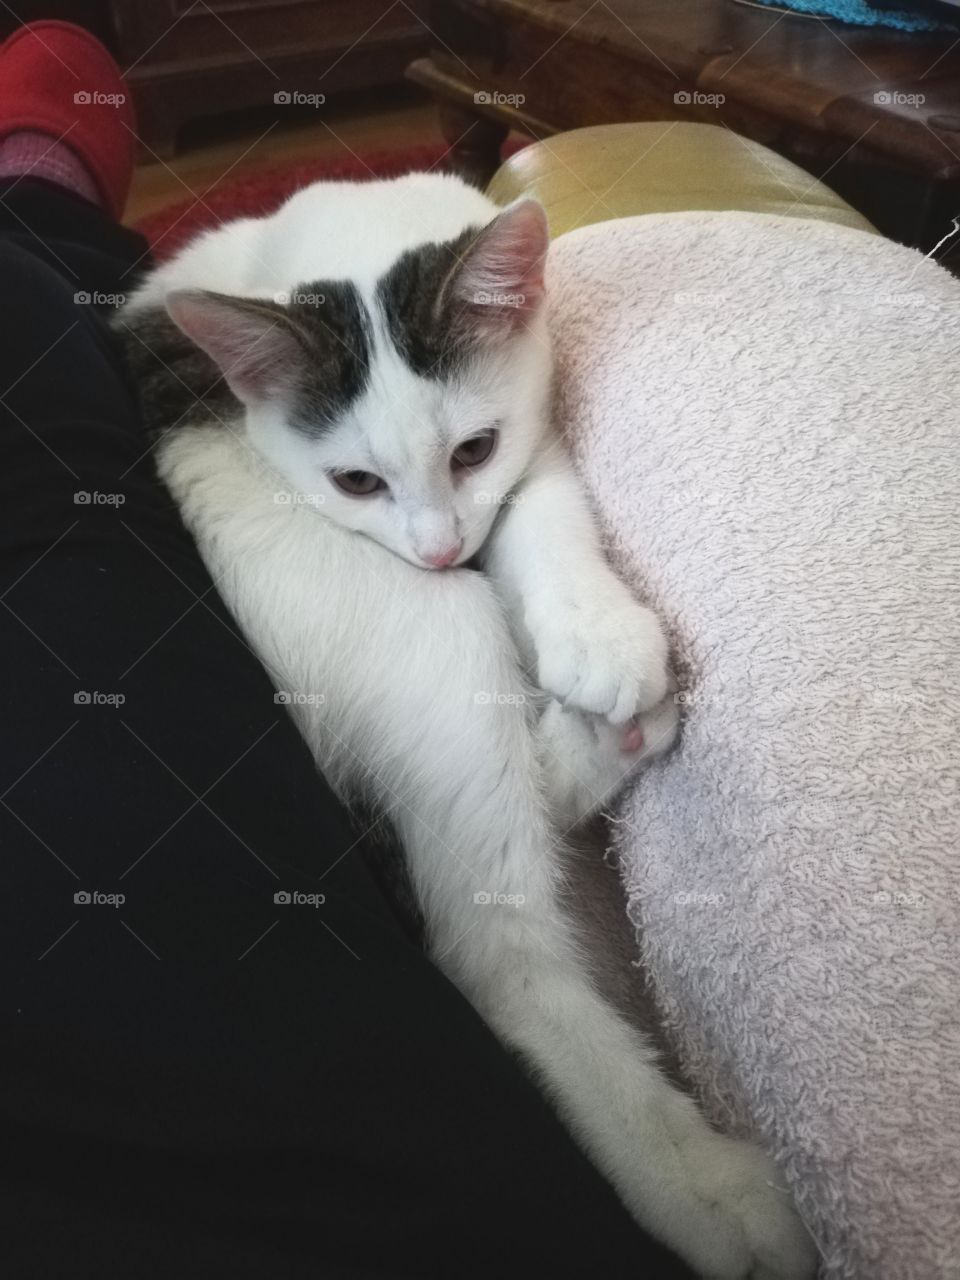 Almost all white kitten, grey and black color around the ears, is leaning the head on its legs and touching a pink pad with one paw and gazing somewhere faraway on the armchair.